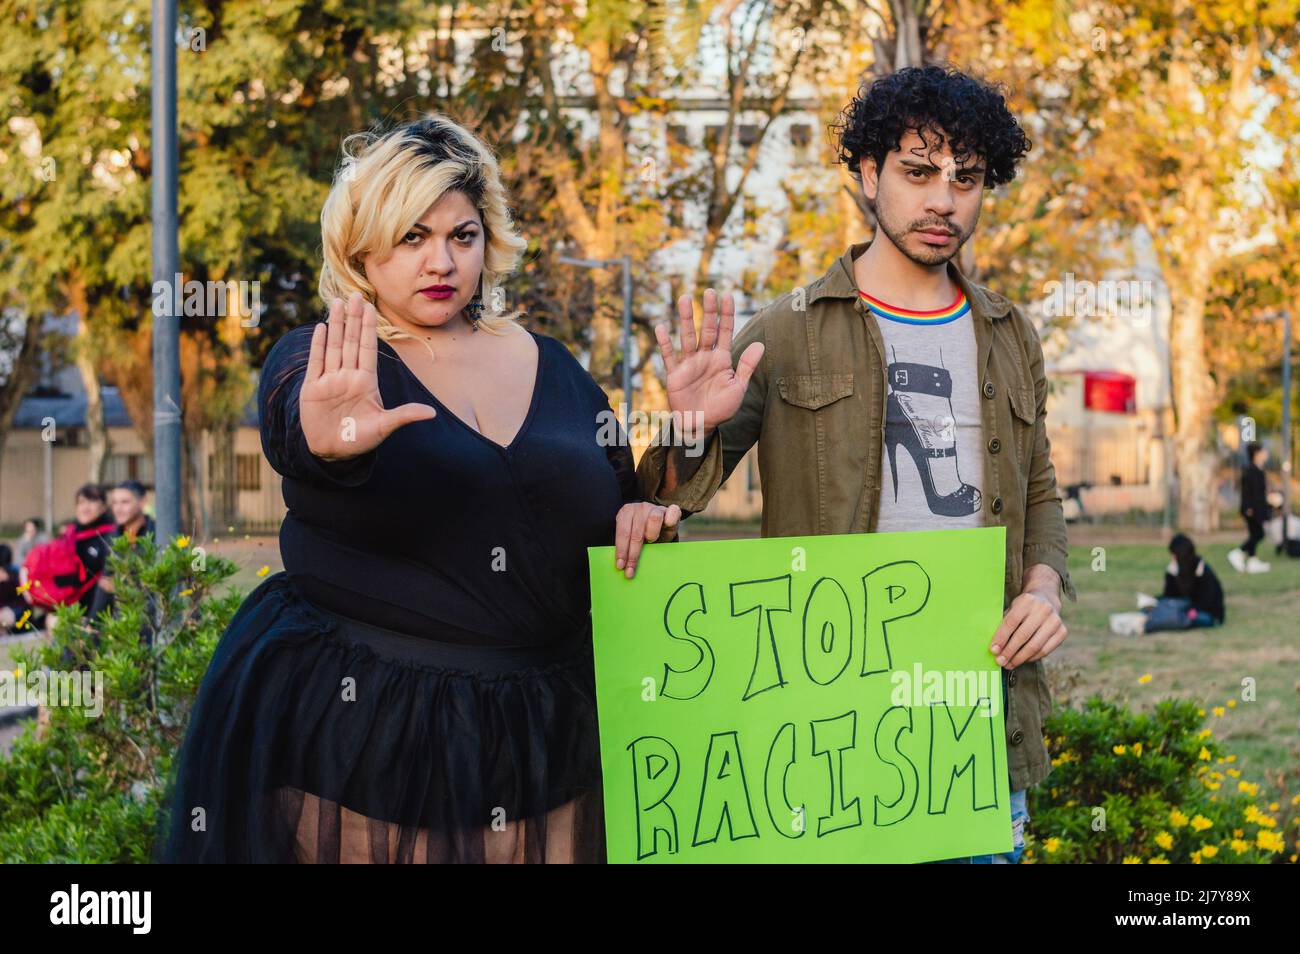 young, serious caucasian man and woman protesting in the park with hands on stop, holding sign that says 'stop racism', inclusive concept. Stock Photo